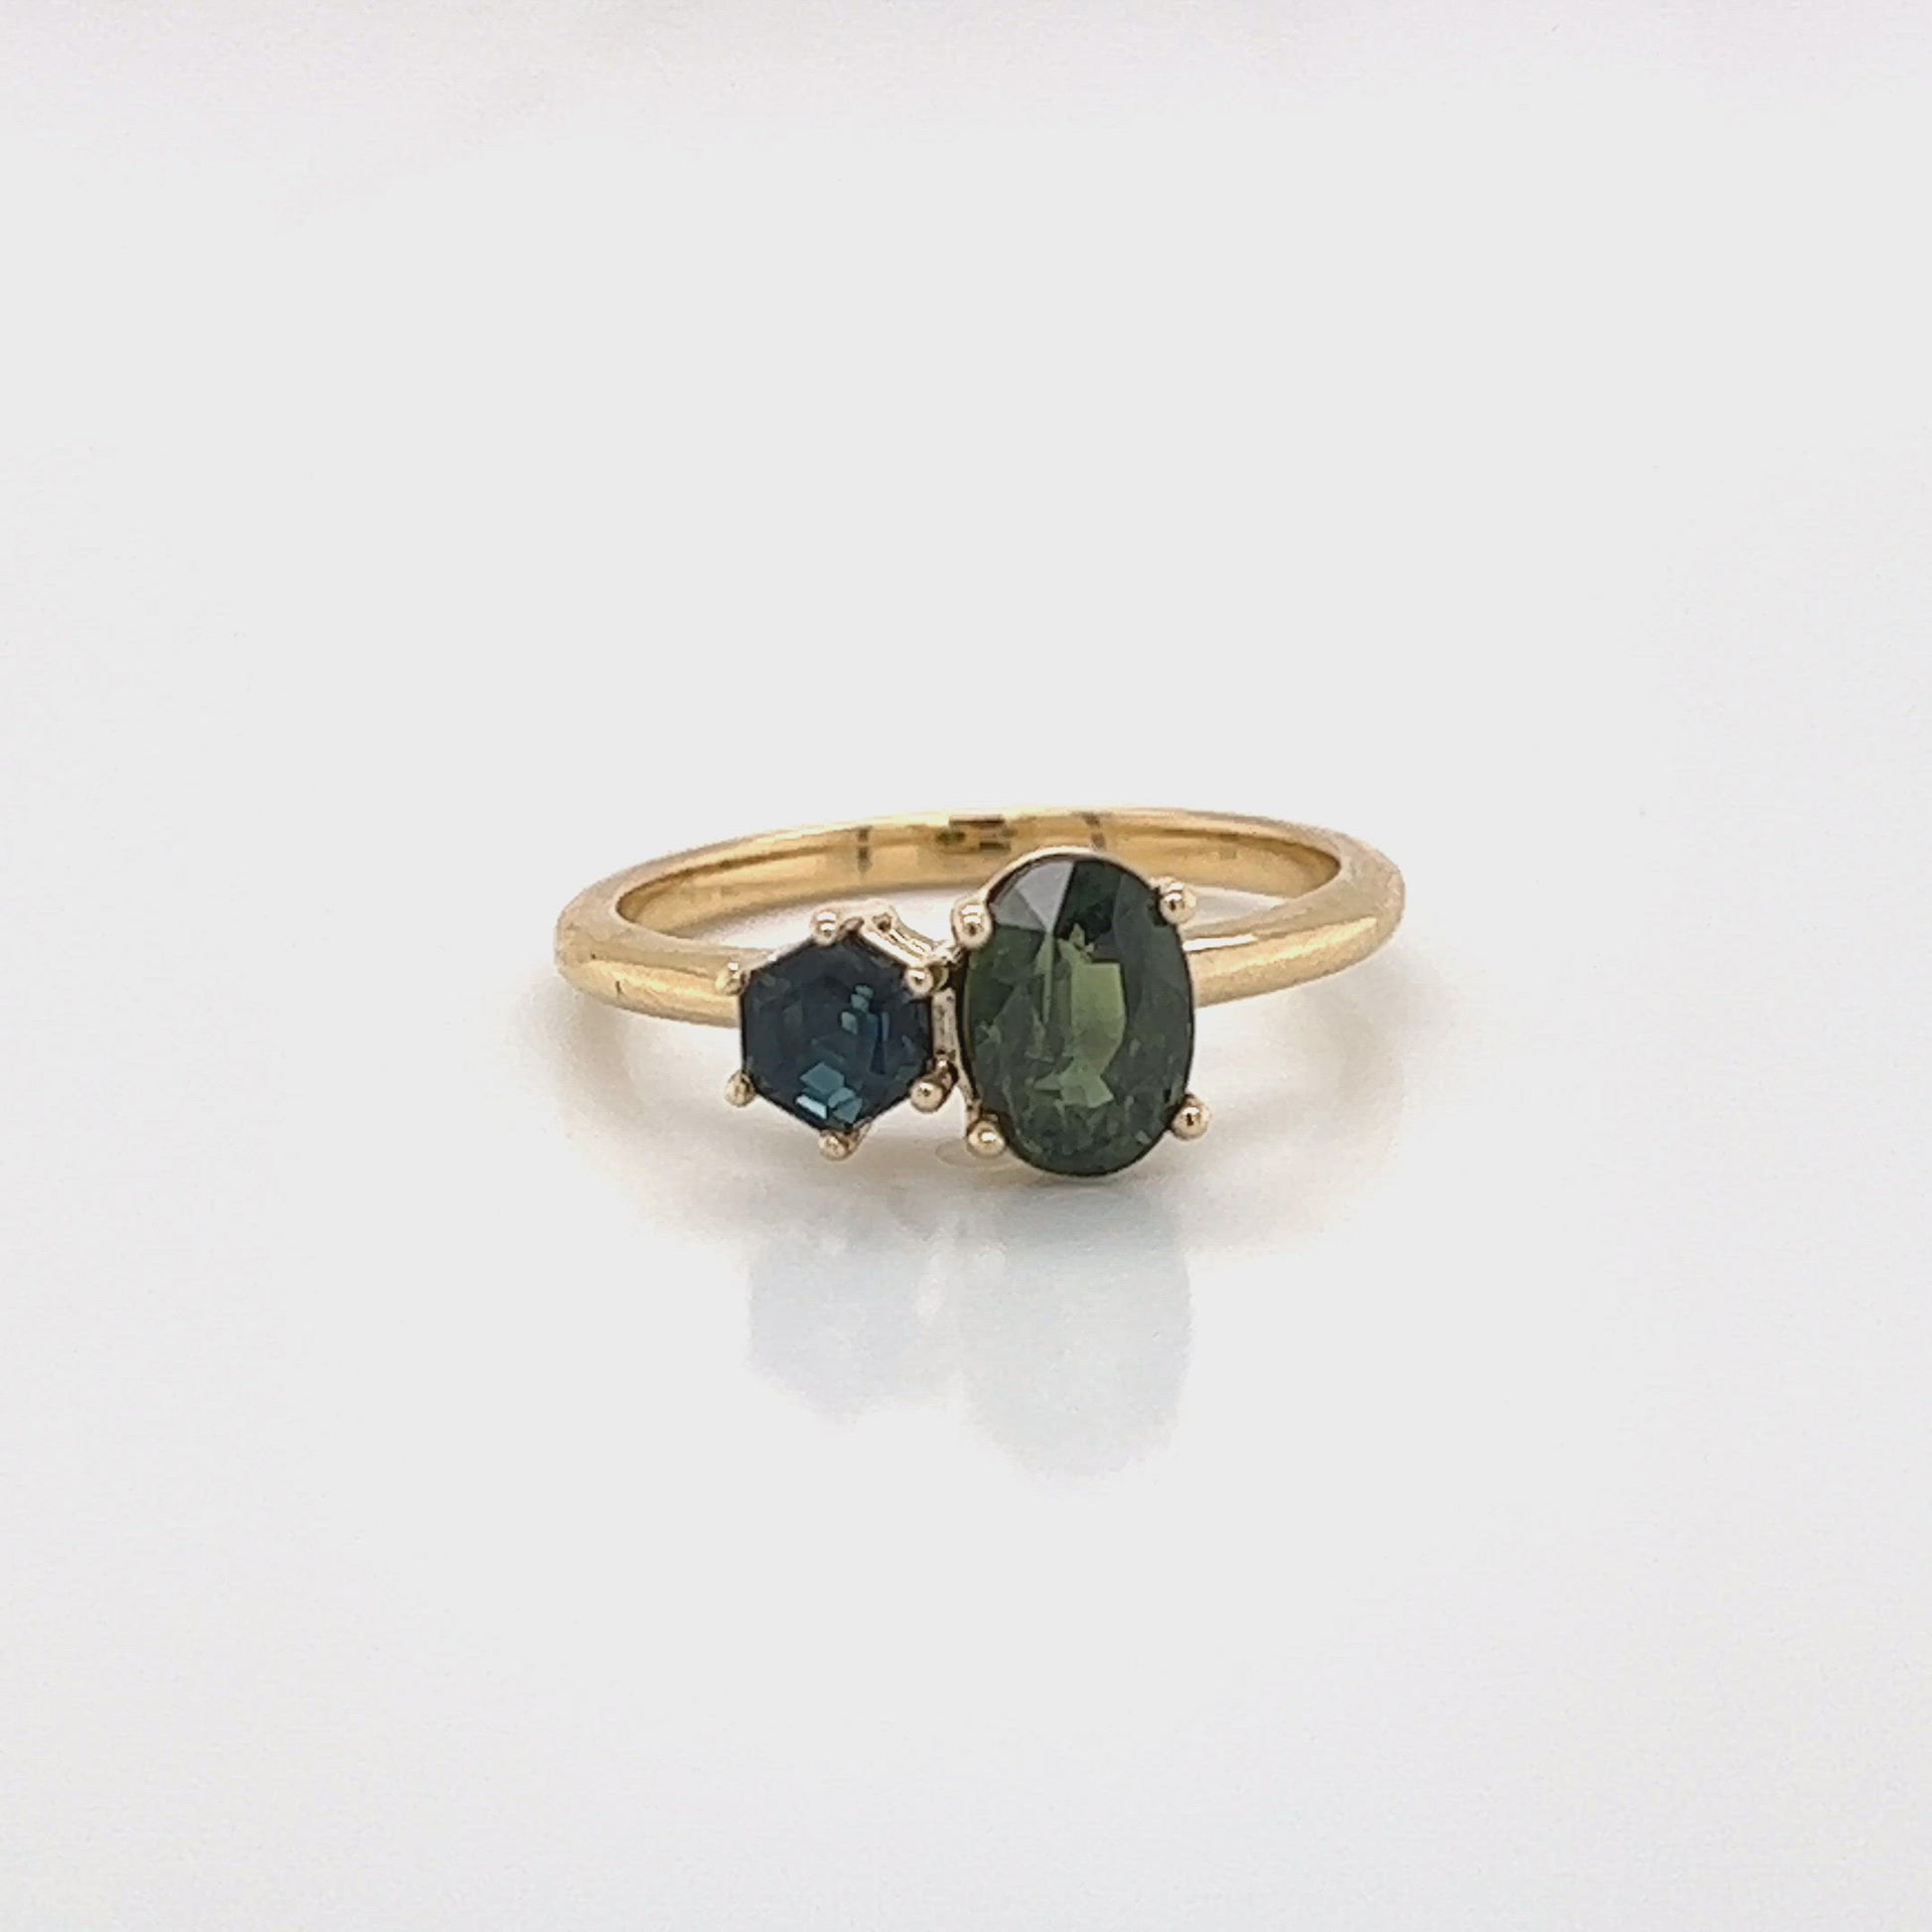 Toi et Moi Ring with a 1.42 Carat Green Oval Sapphire and a 0.66 Blue Hexagon Sapphire in 14k Yellow Gold - Ready to Size and Ship